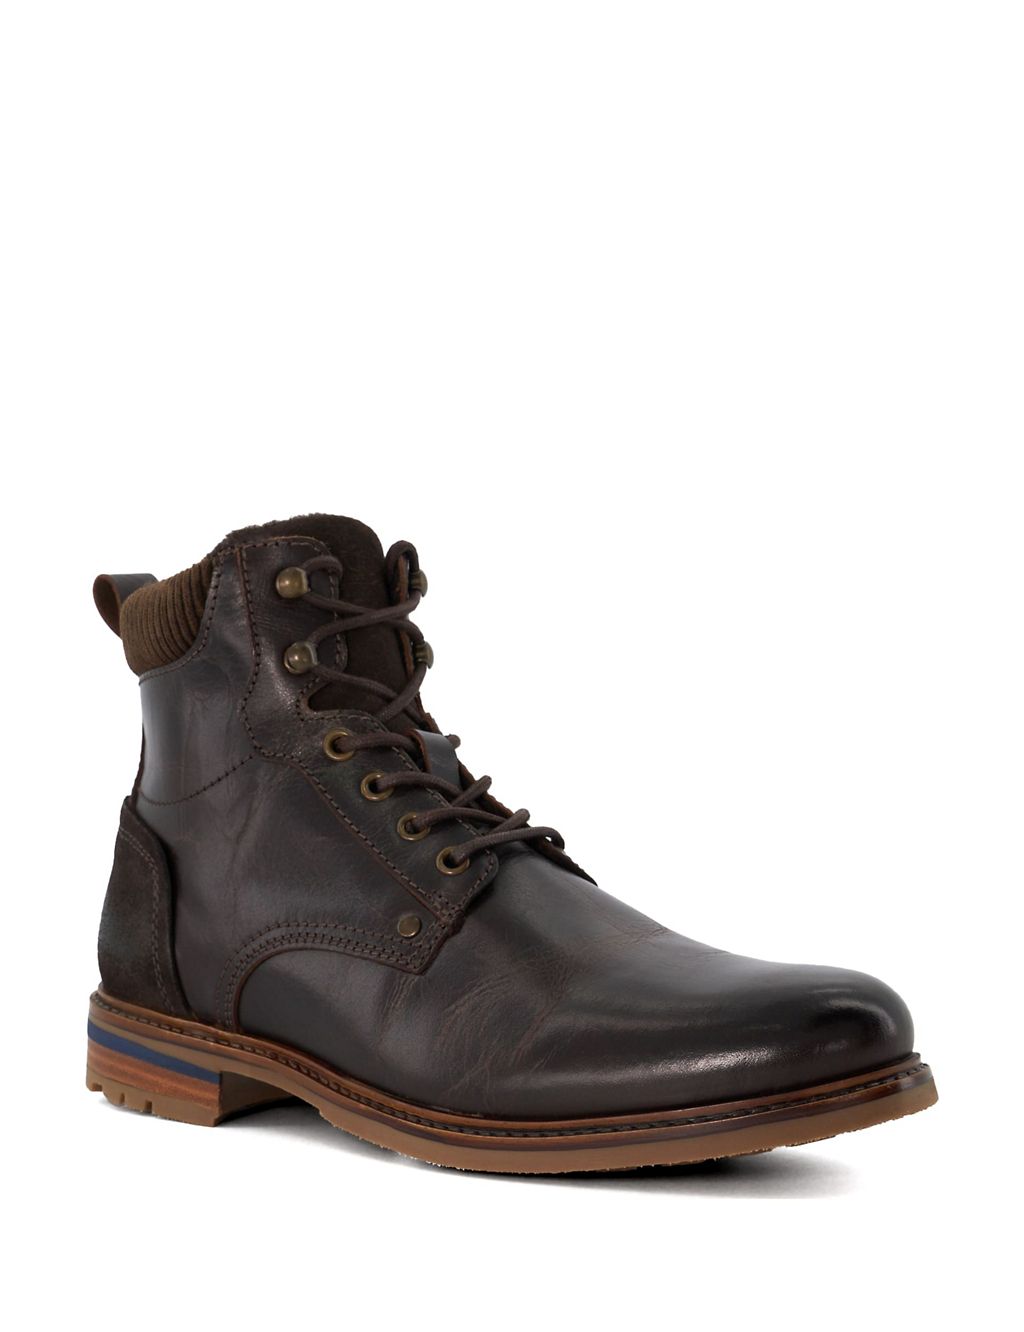 Leather Casual Boots | Dune London | M&S